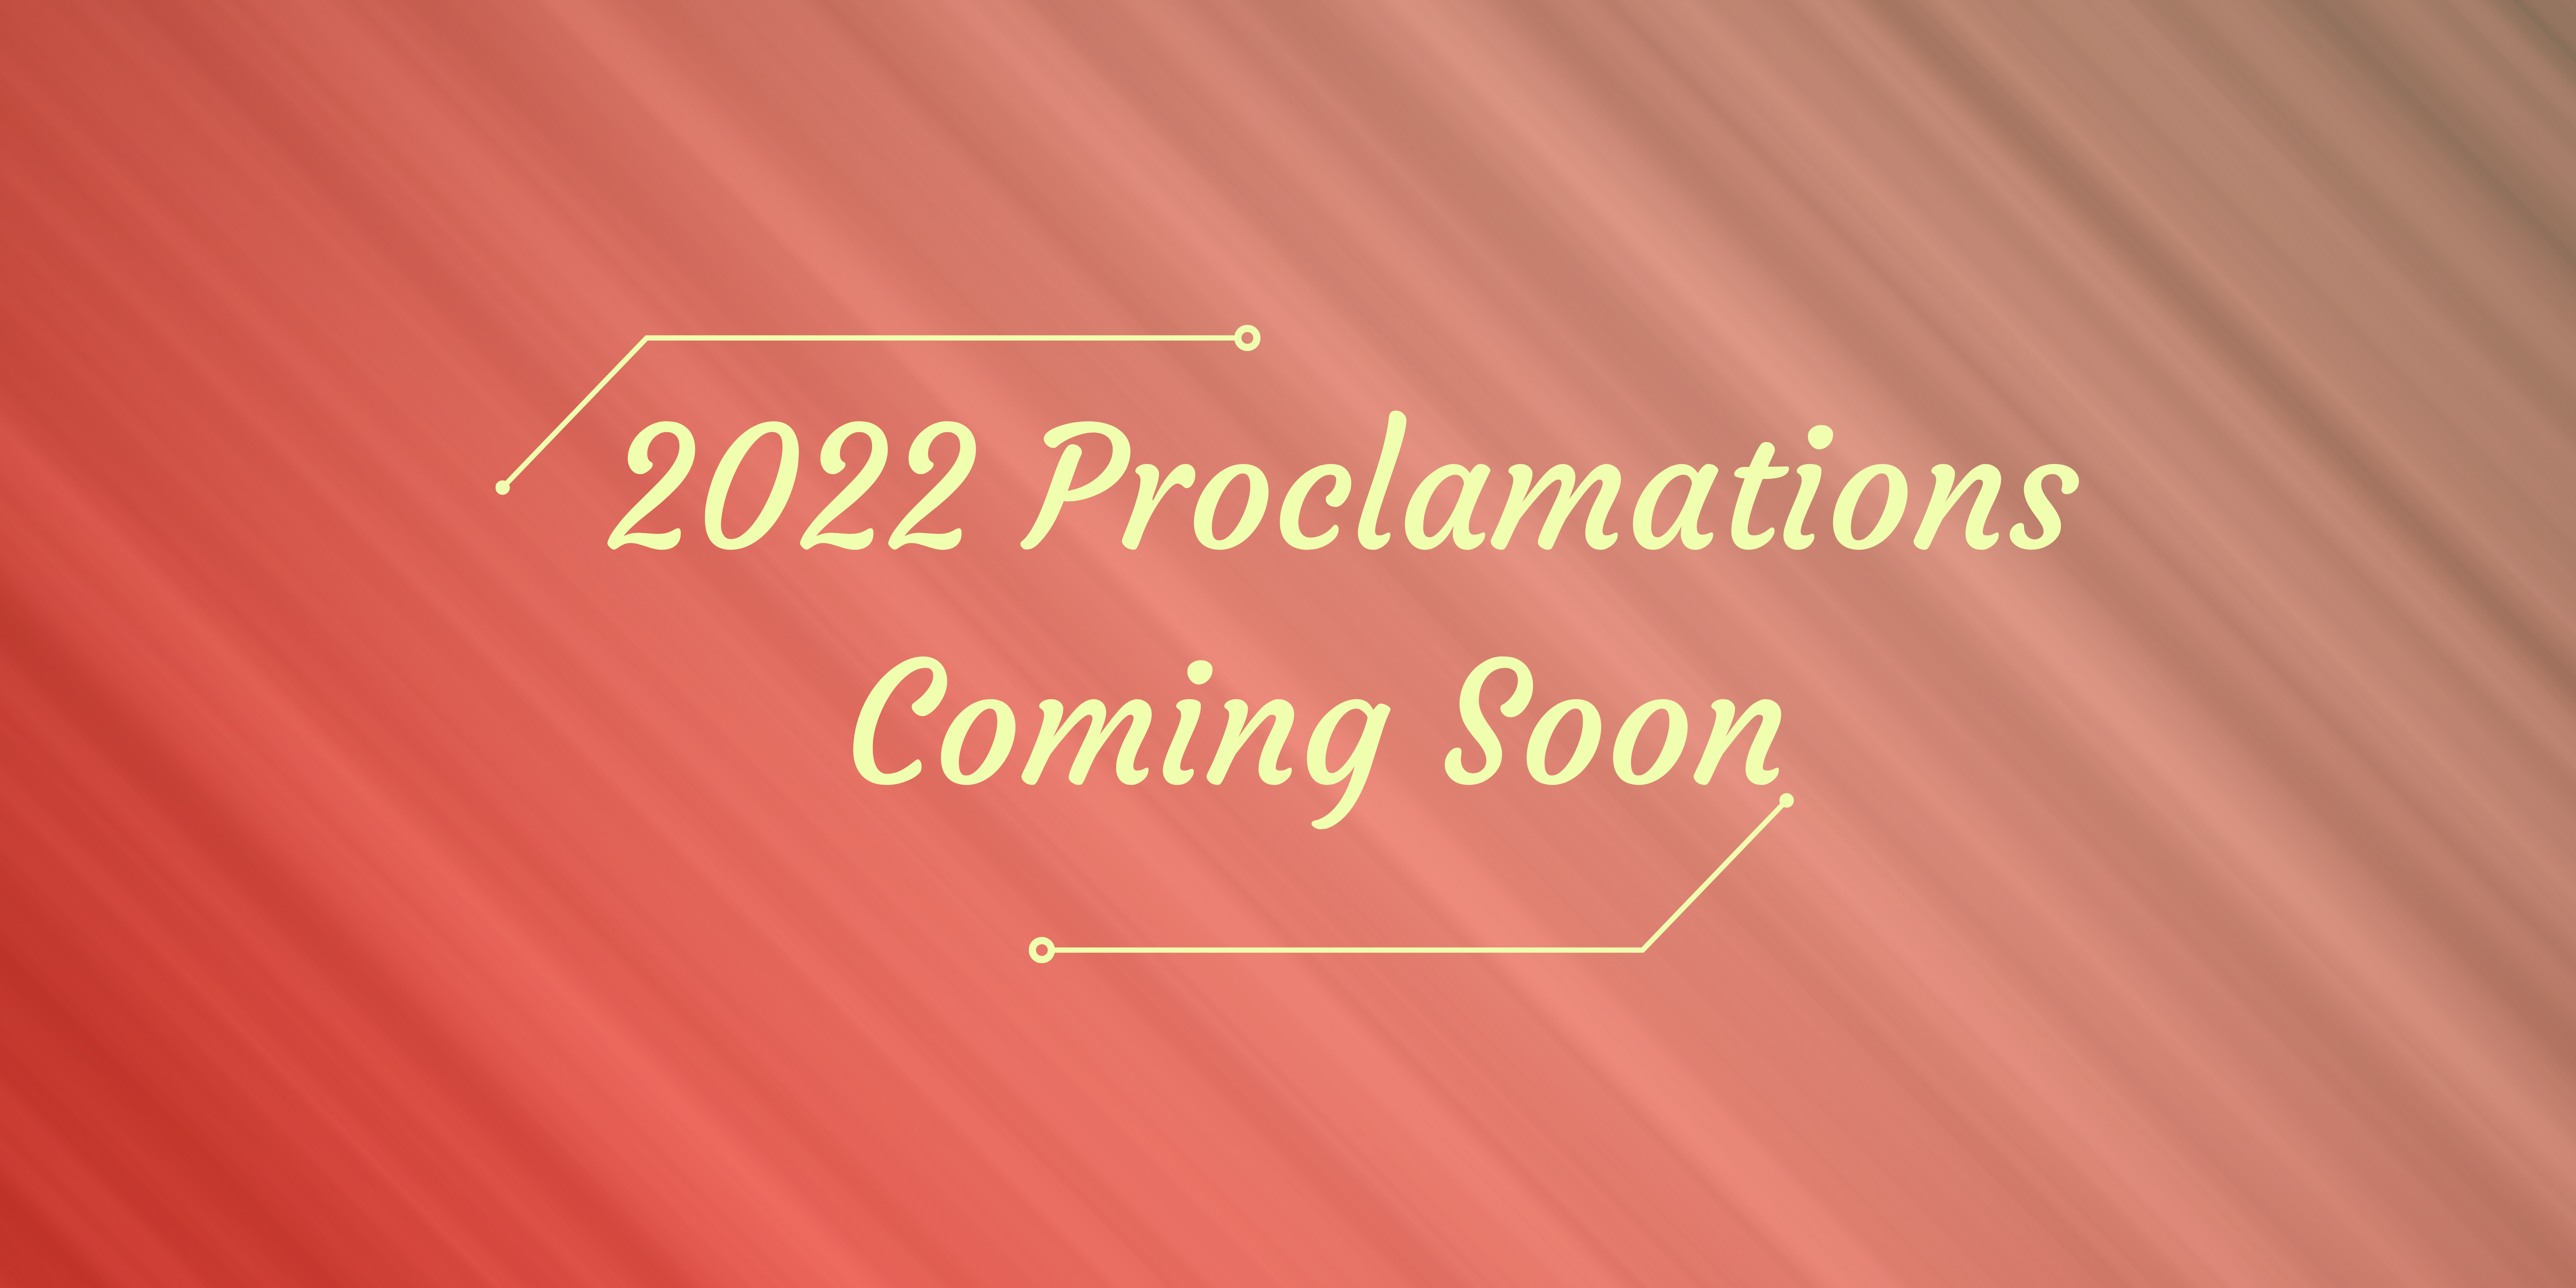 Coming Soon Procalmations (2)